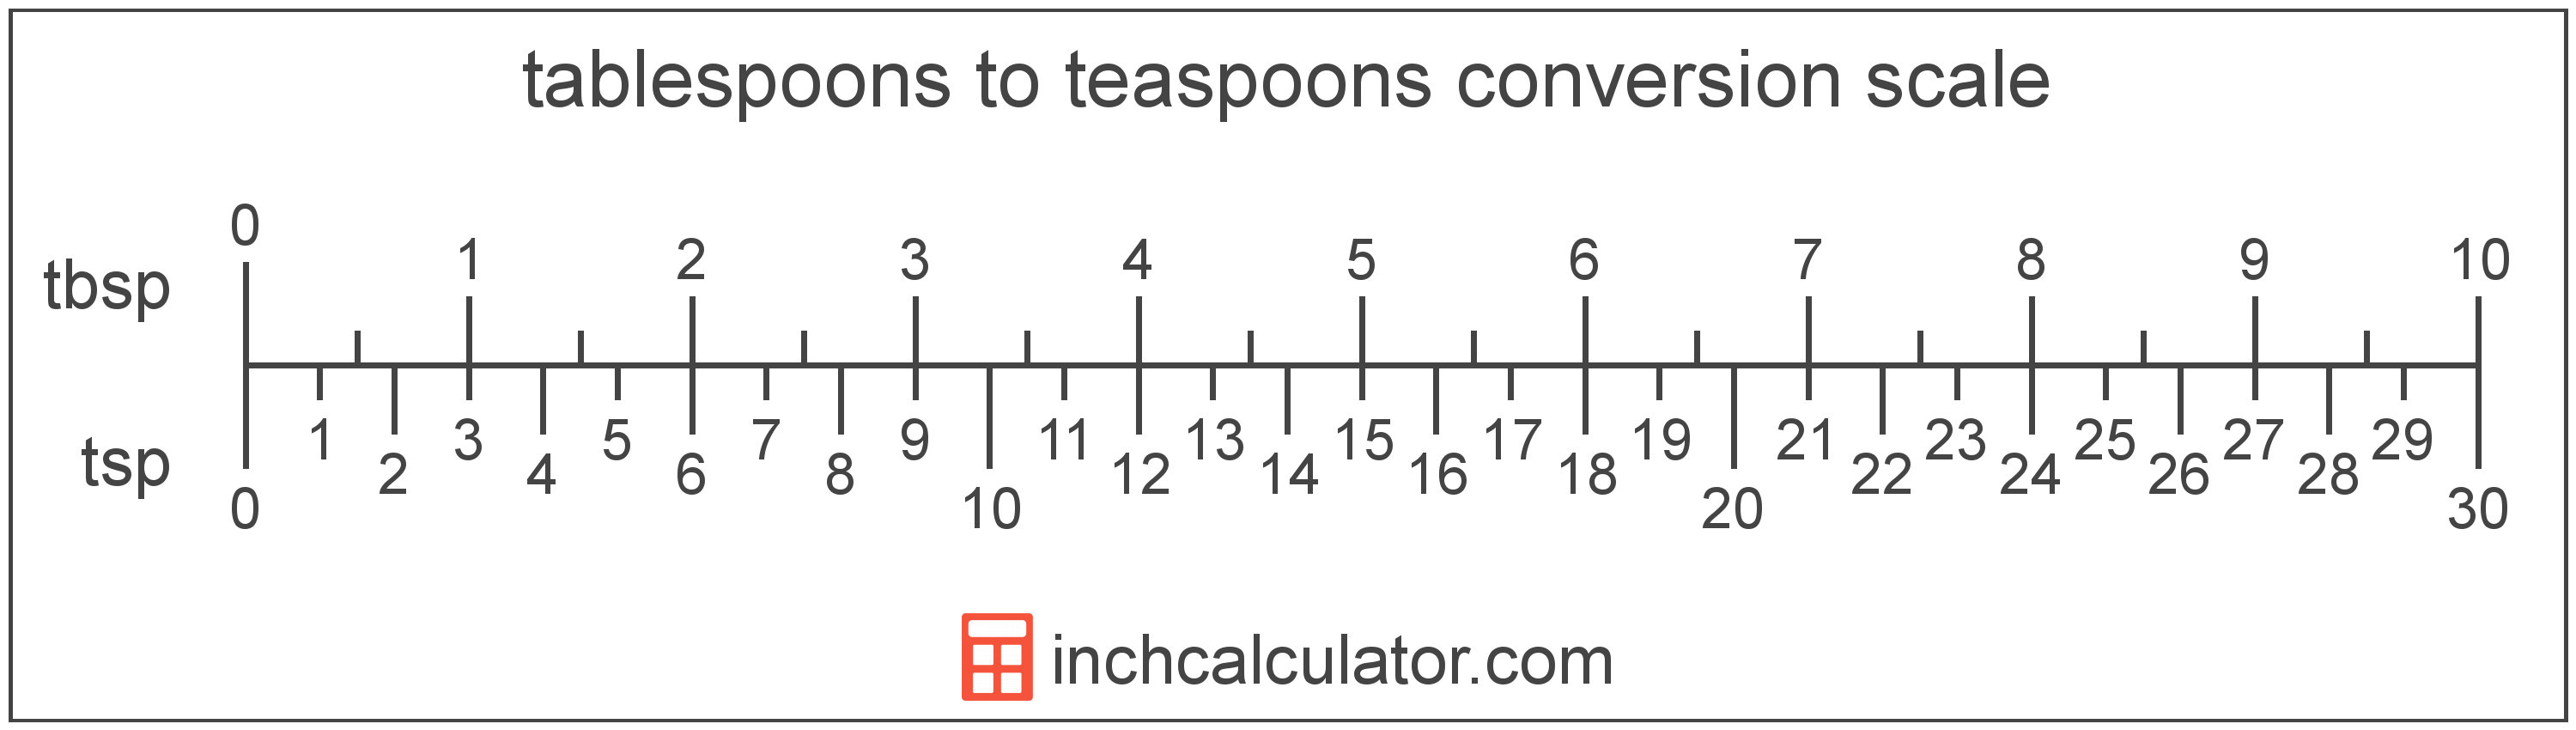 Teaspoons to Tablespoons Conversion (tsp to tbsp)